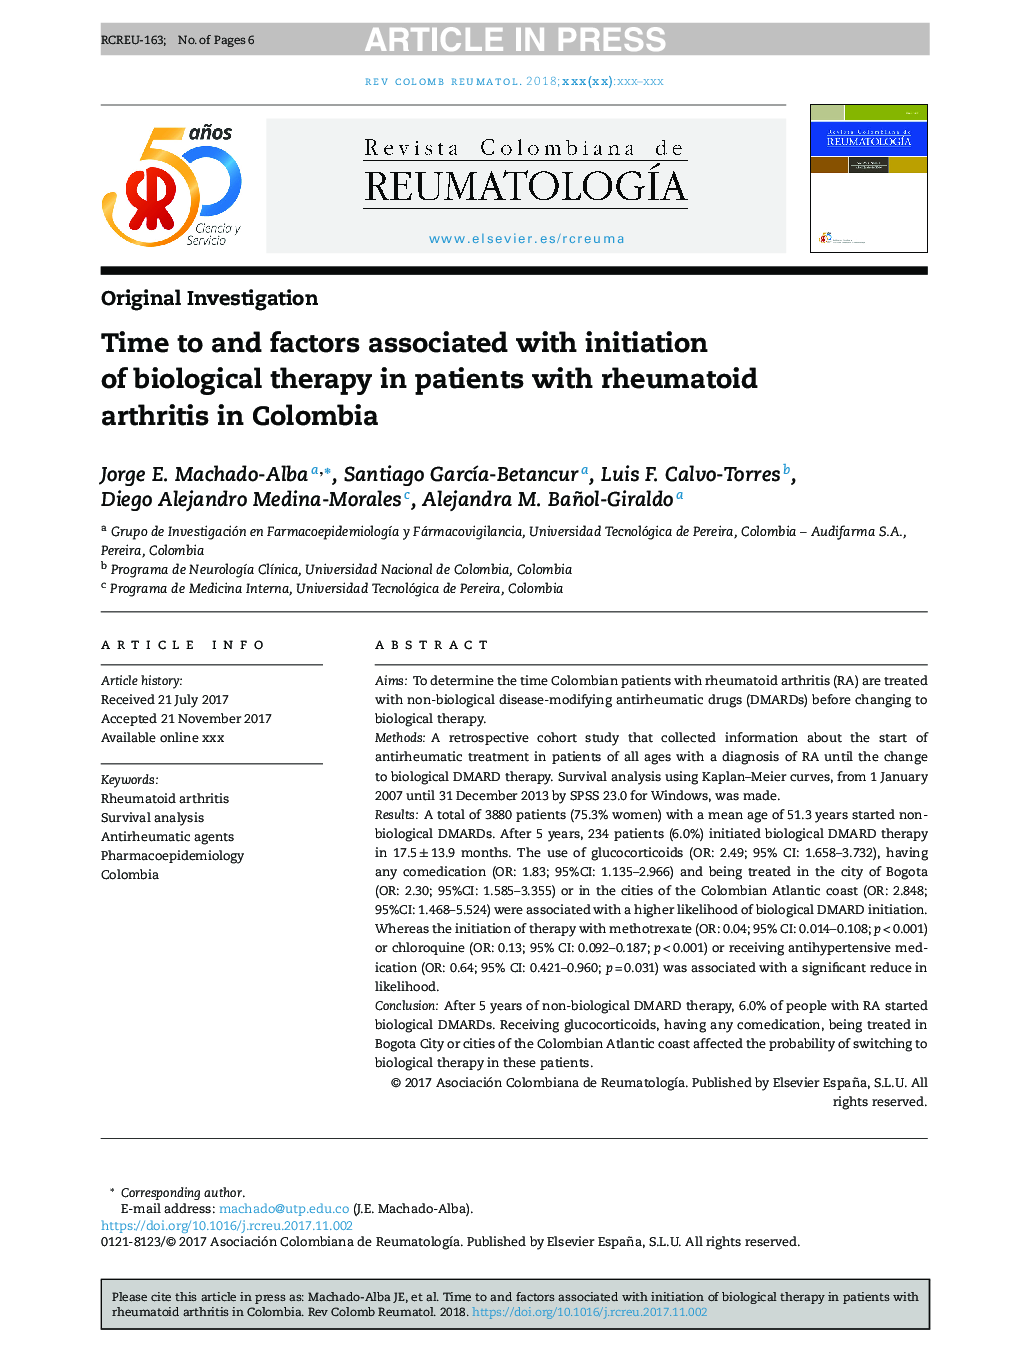 Time to and factors associated with initiation of biological therapy in patients with rheumatoid arthritis in Colombia